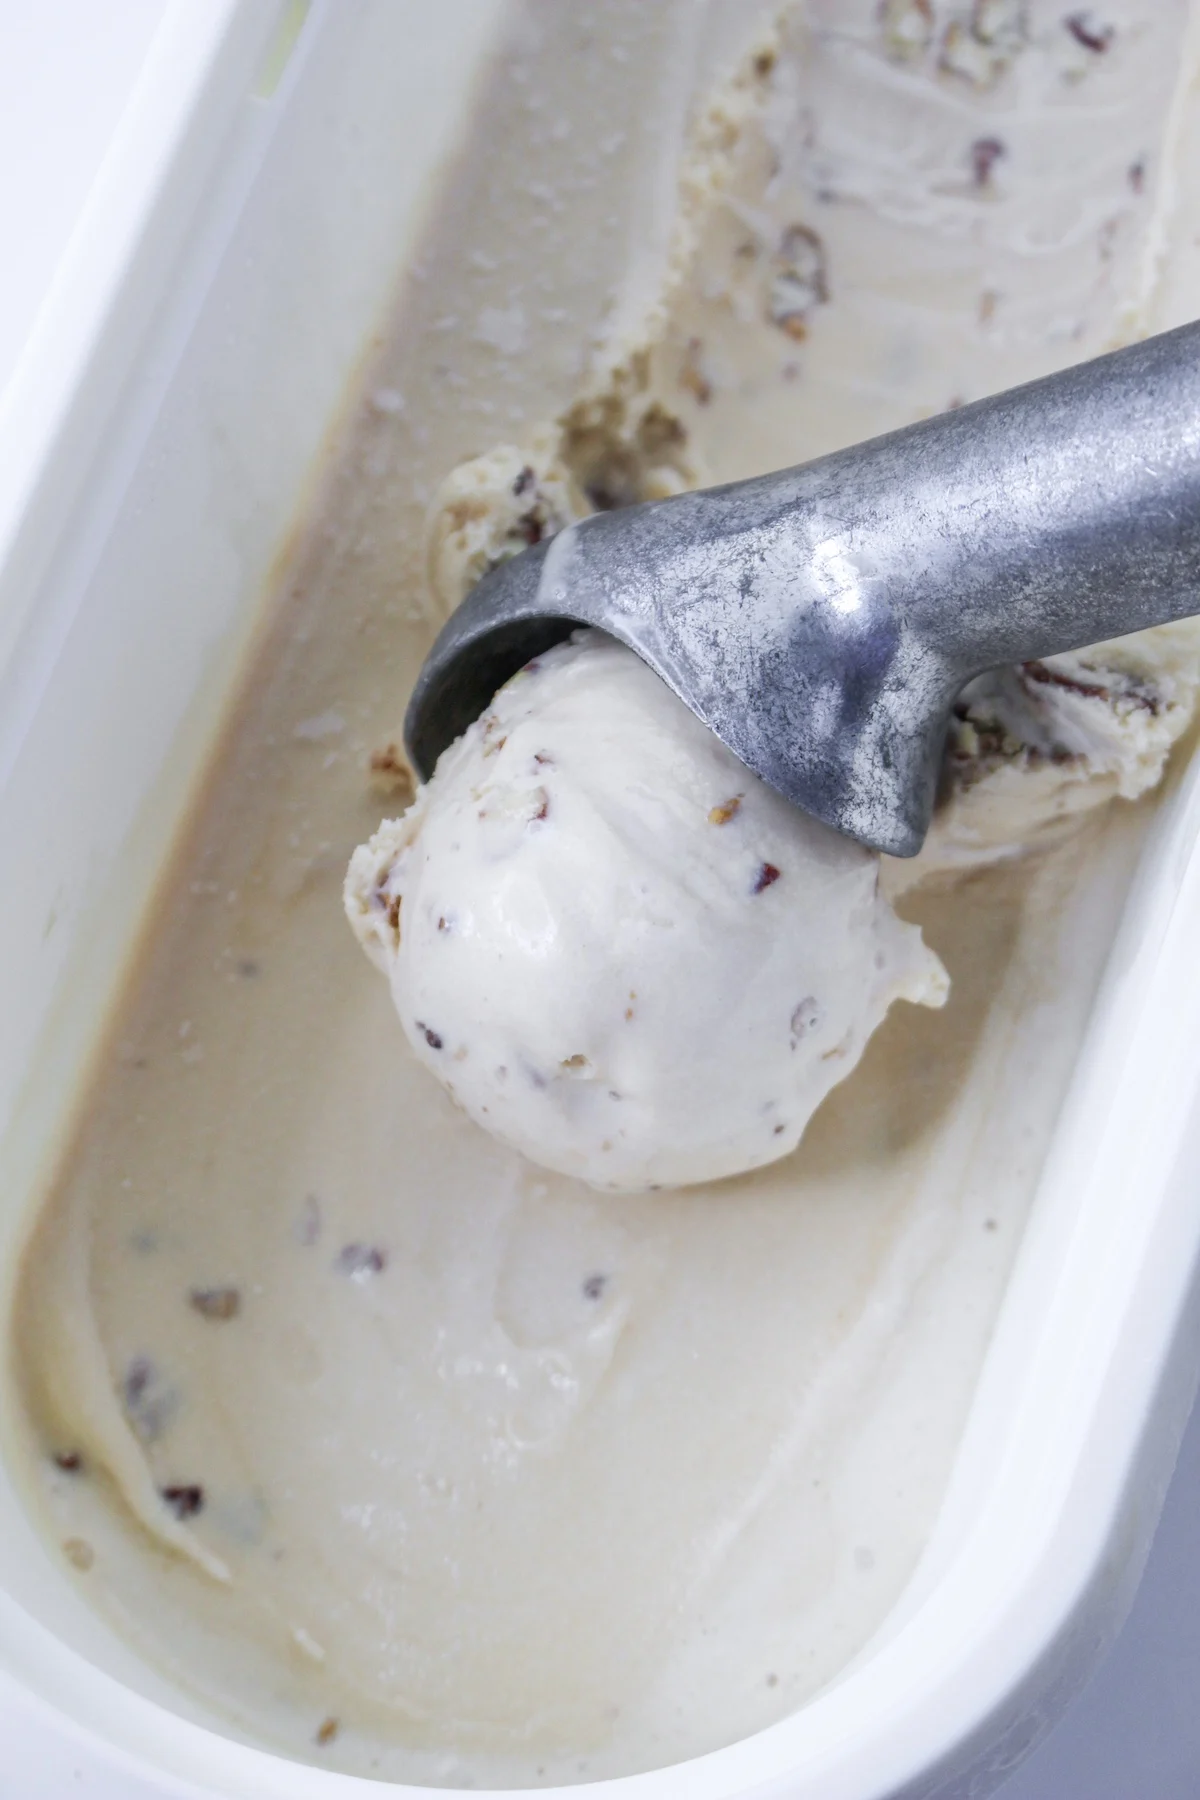 Butter and pecan ice cream being scooped out of a container with an ice cream scoop